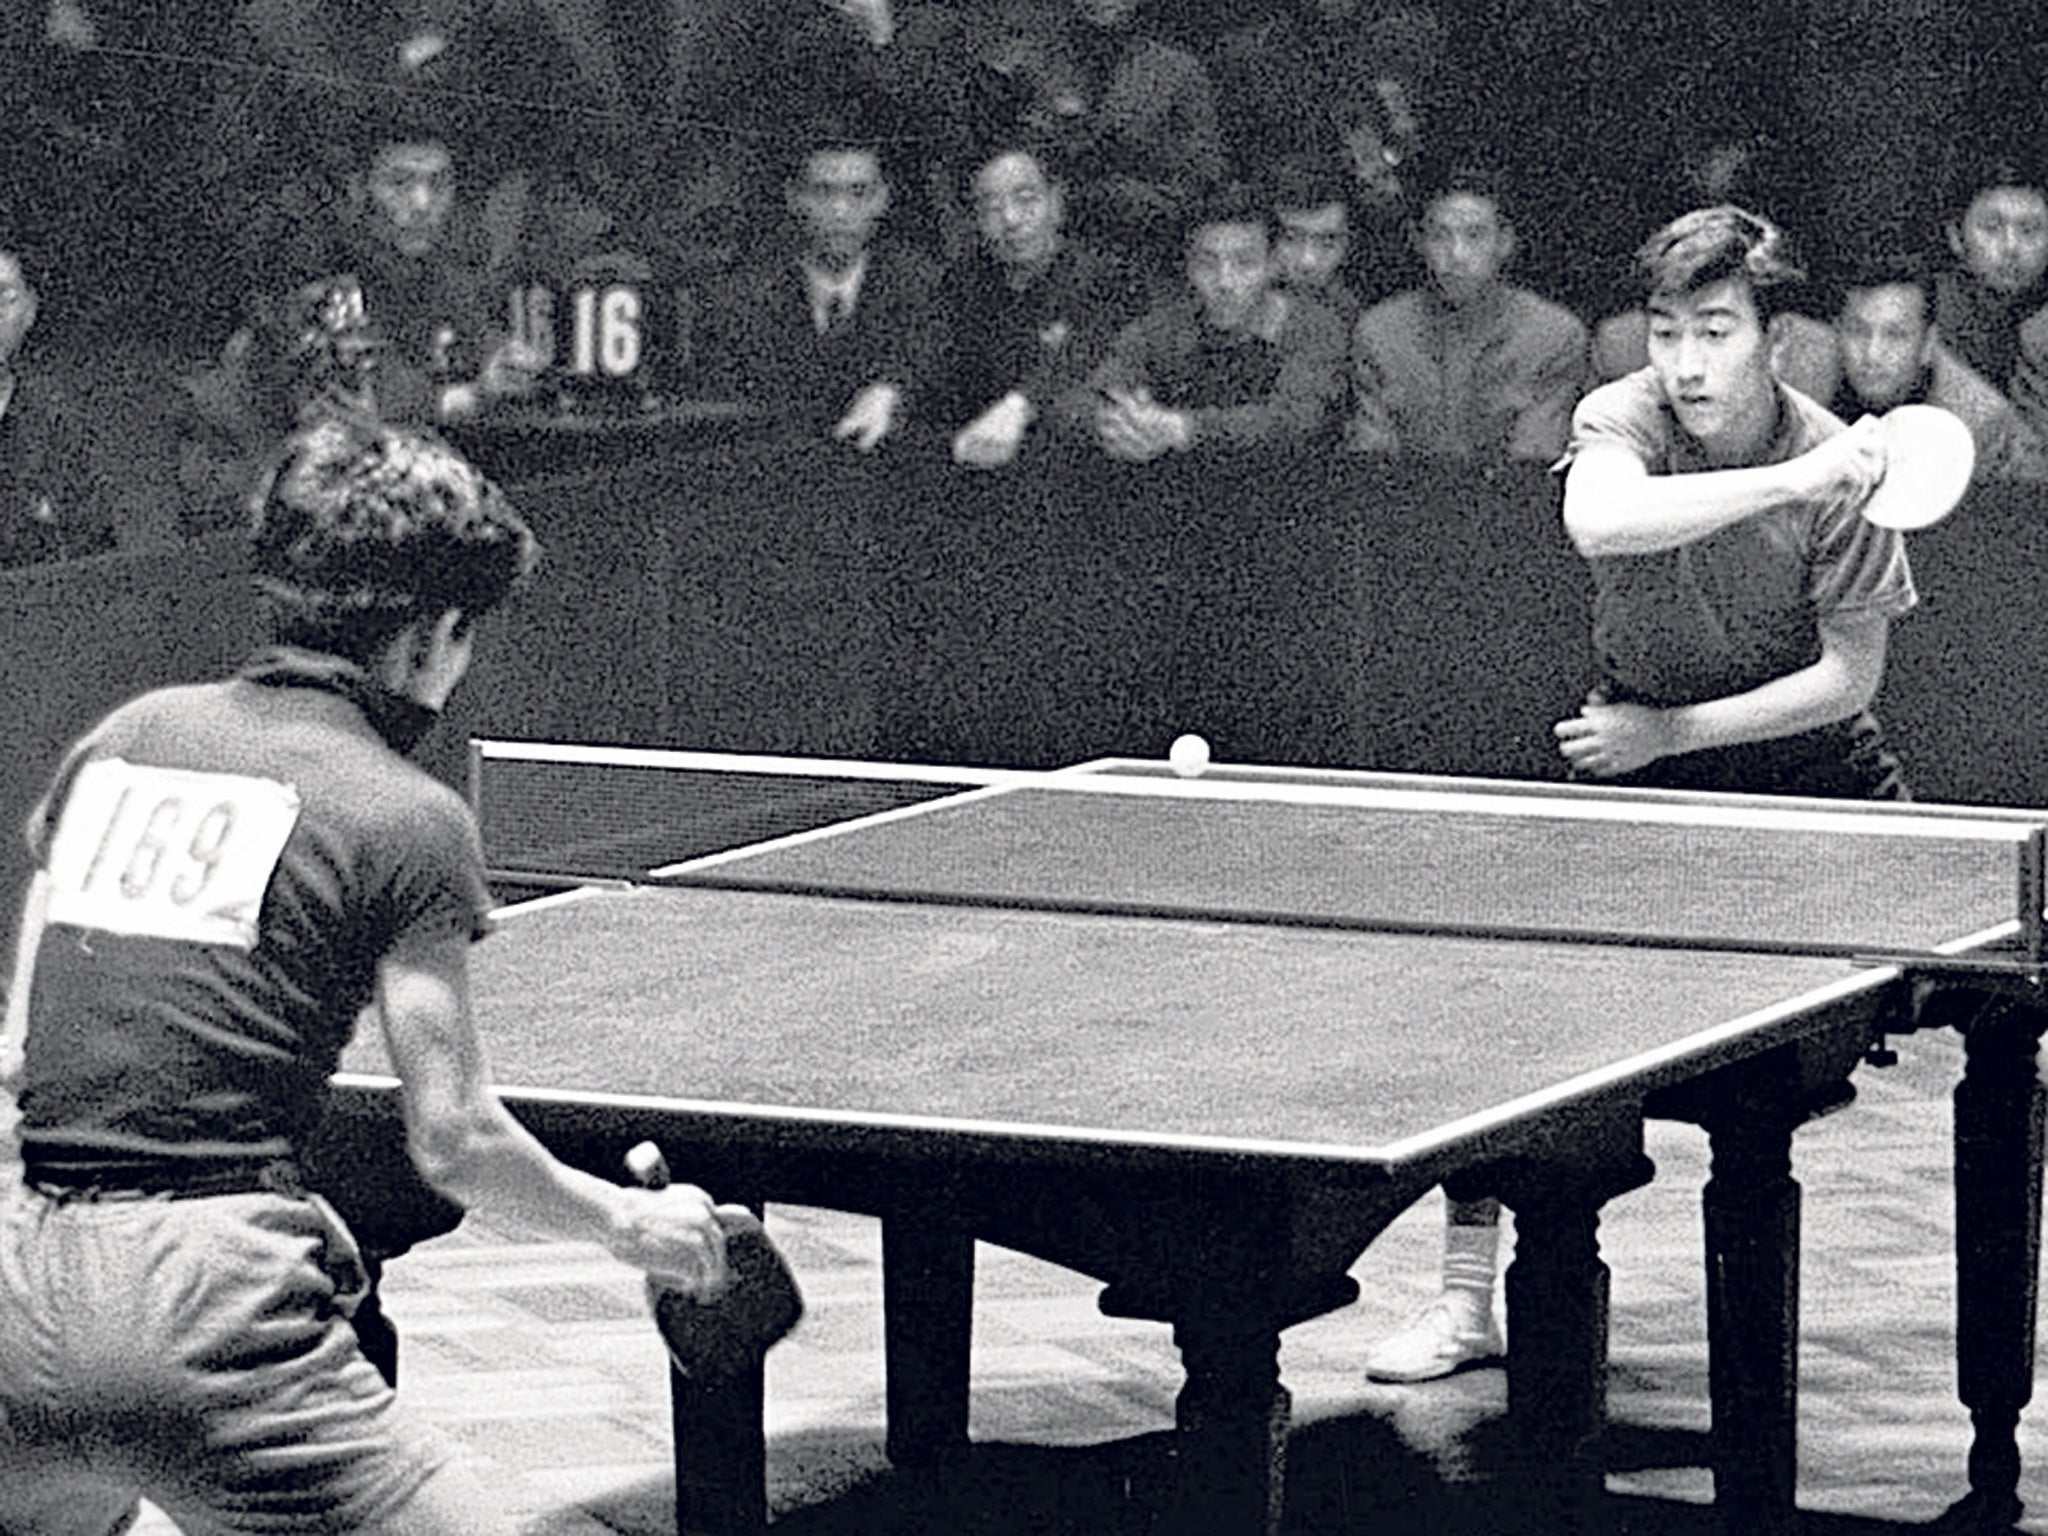 Zhuang, right, on his way to winning the 1961 World Table Tennis Championships in Beijing